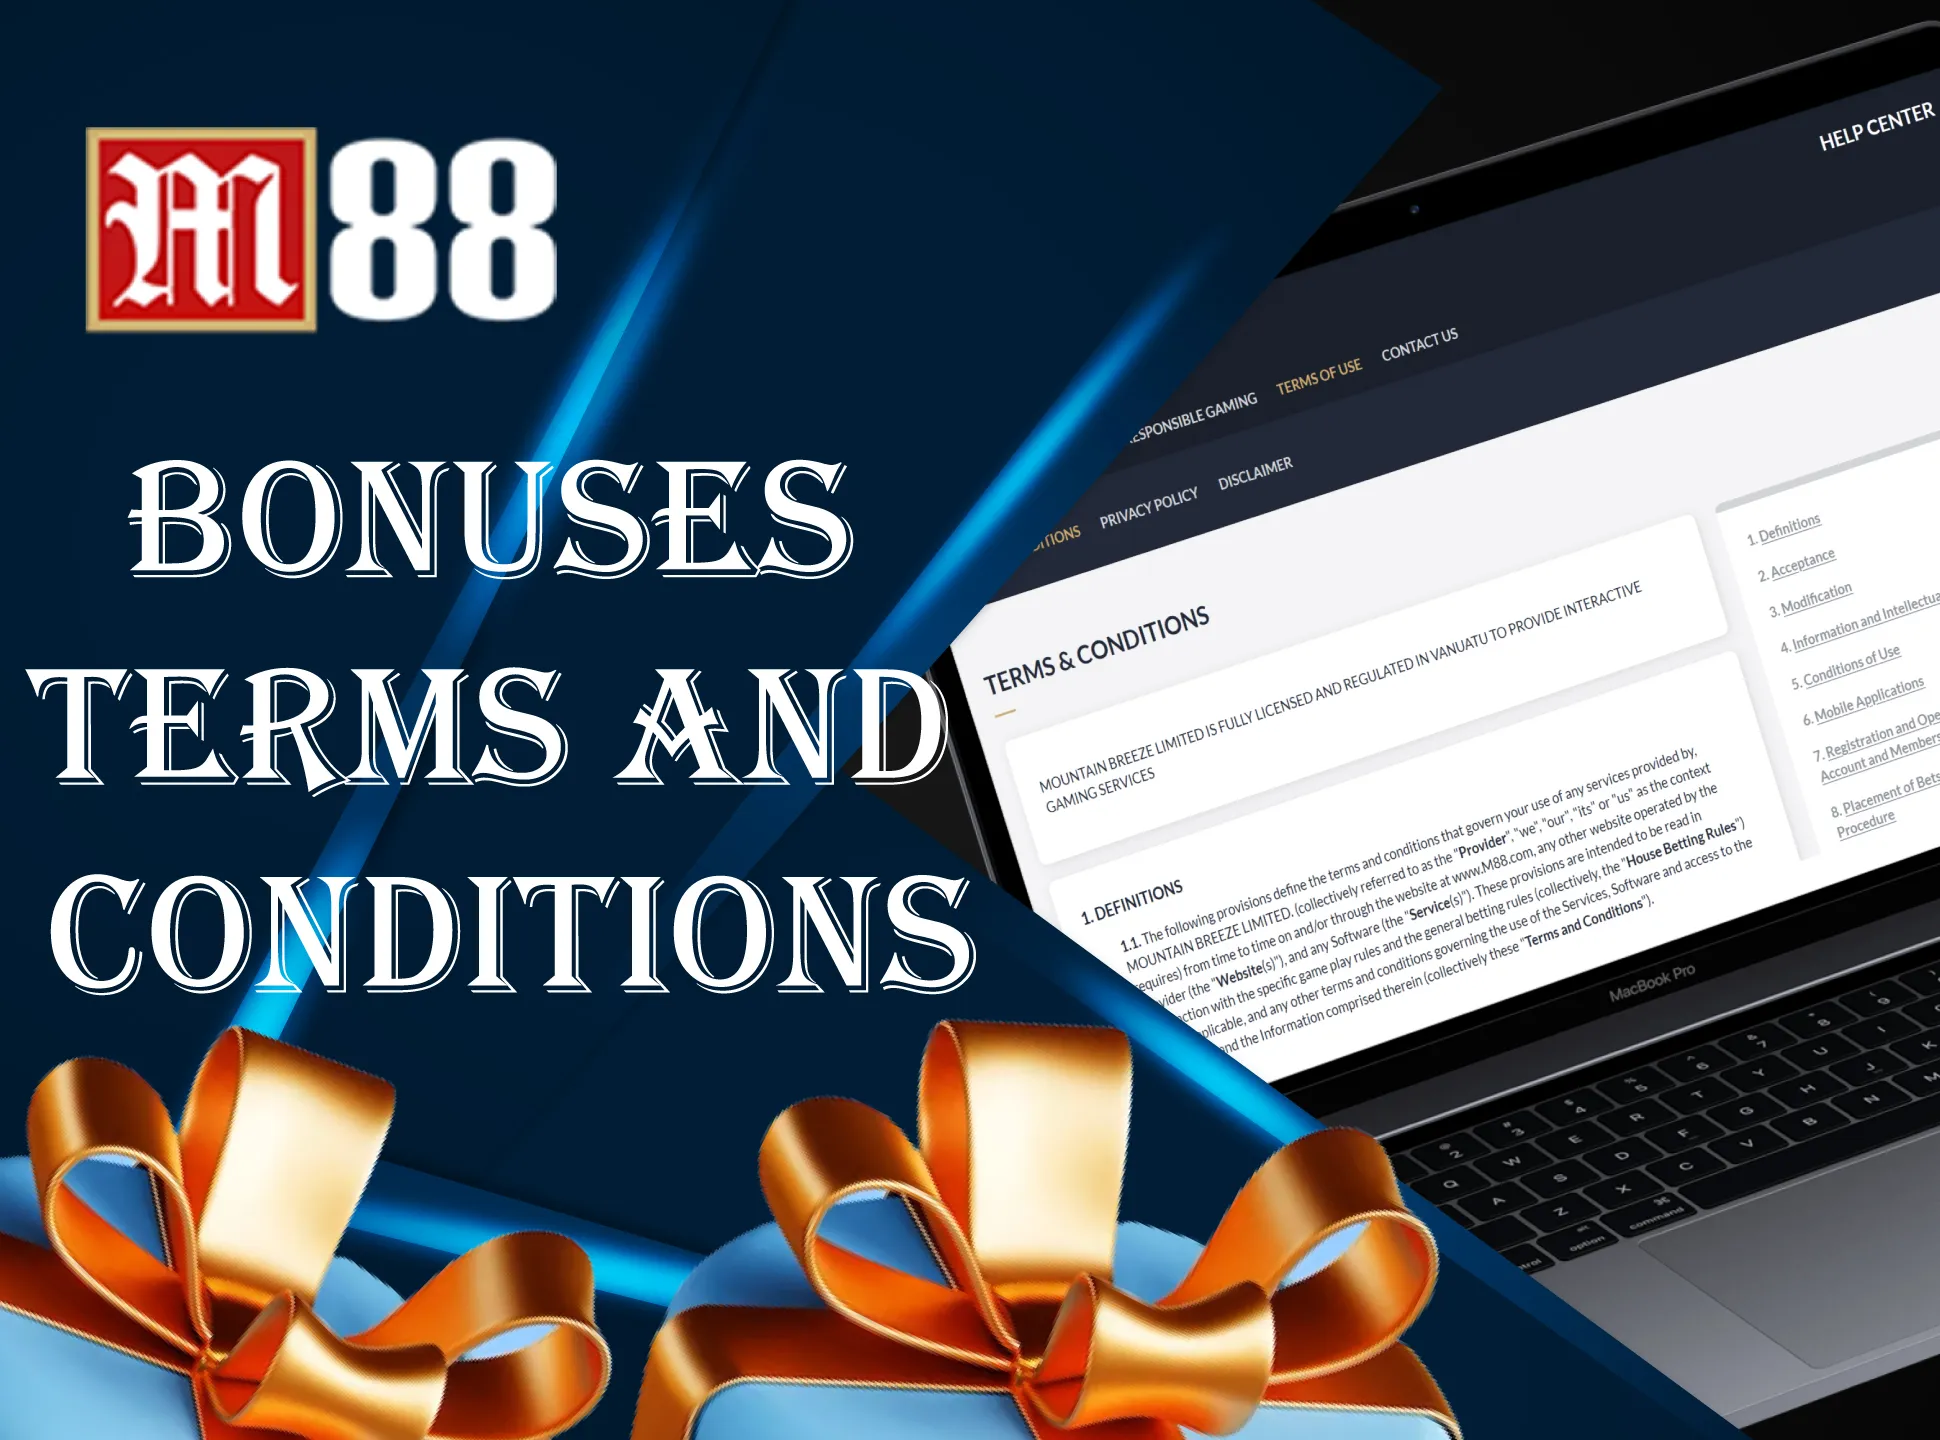 Read and follow all of the M88 terms and conditions.